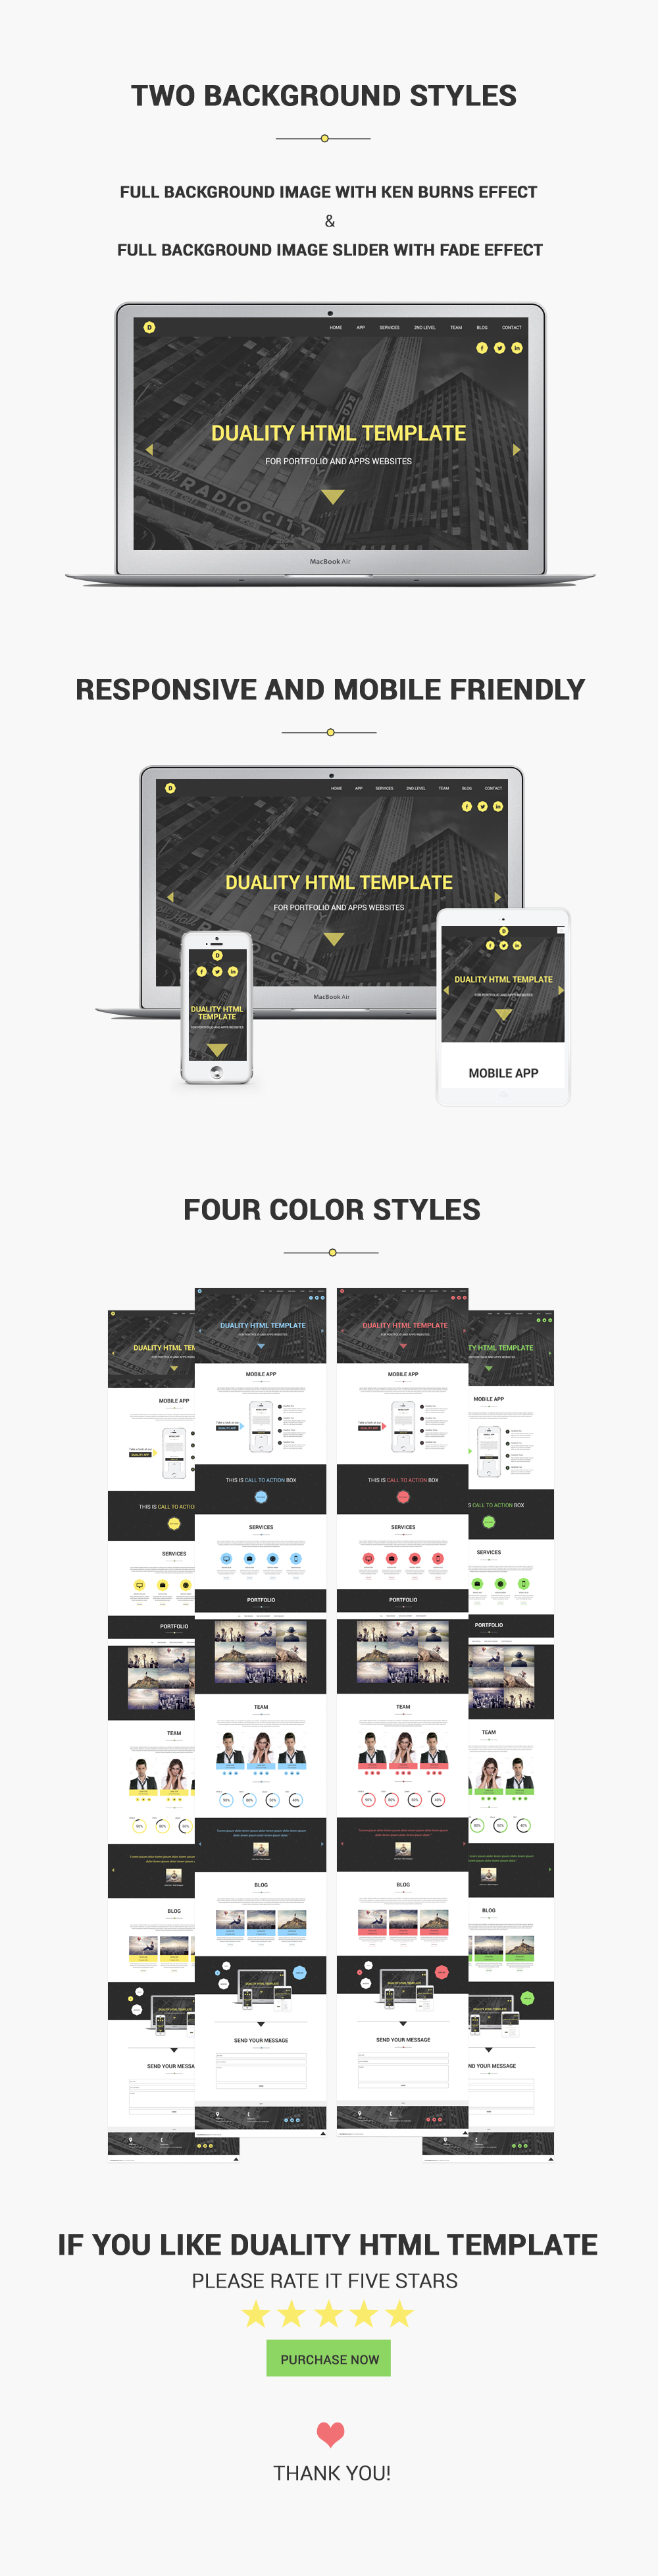 Duality - Portfolio and Apps HTML5 Template - 2